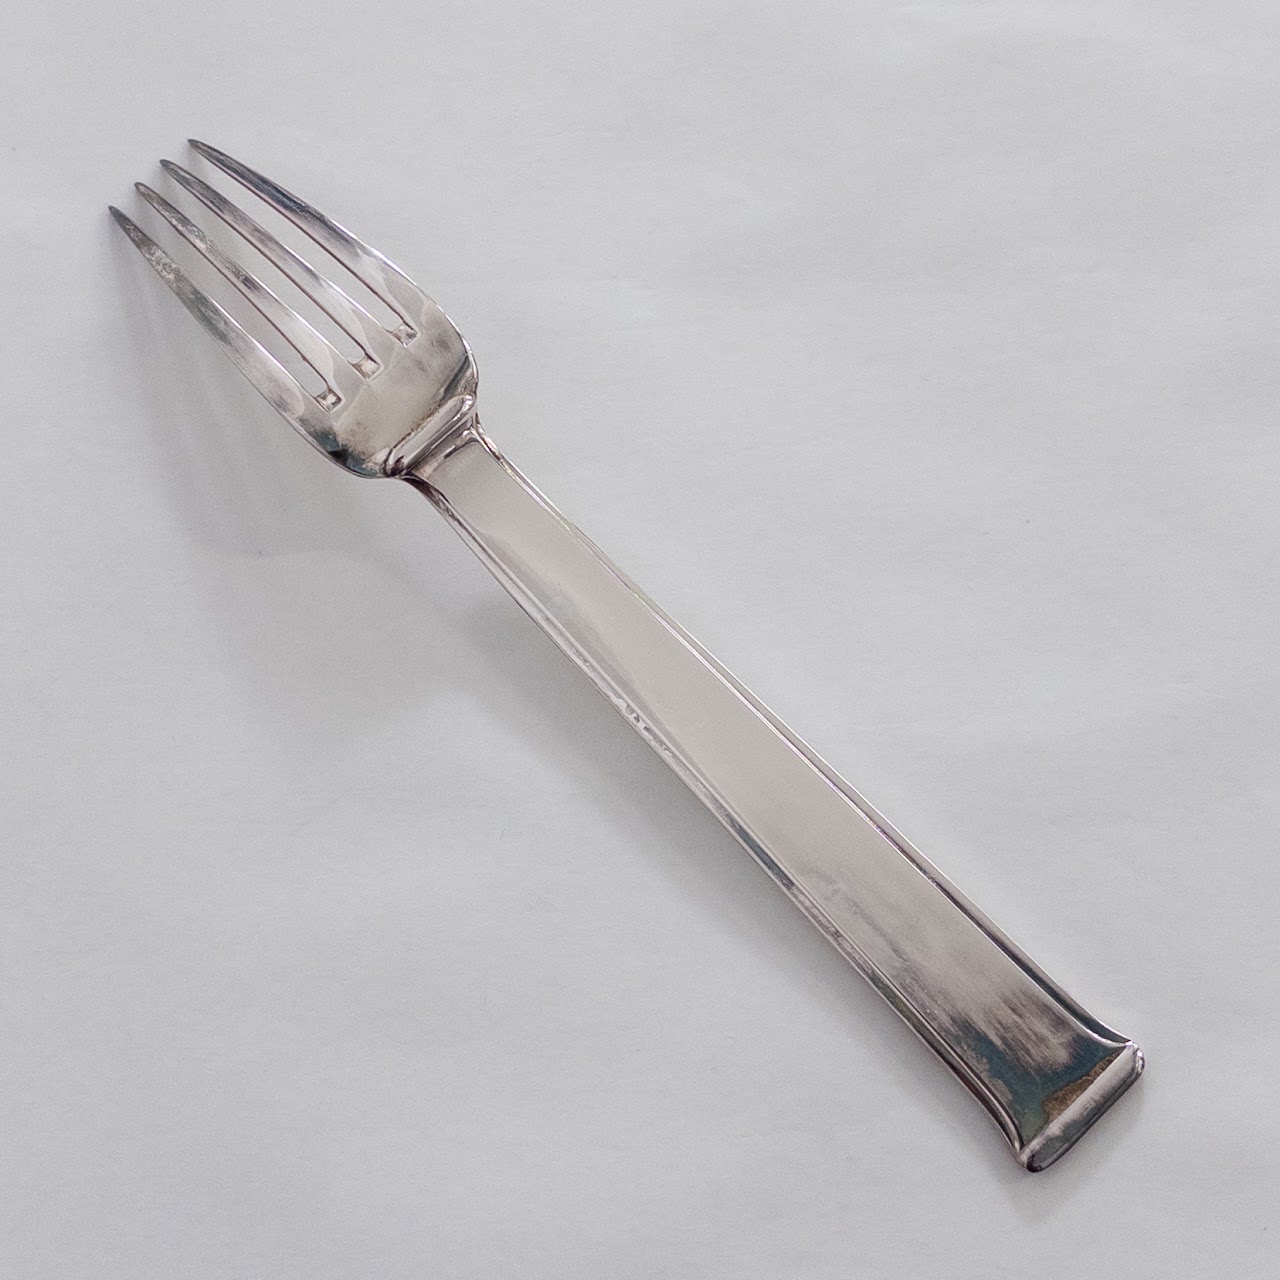 Ercuis Sequoia Silver Plated Flatware Service for Six